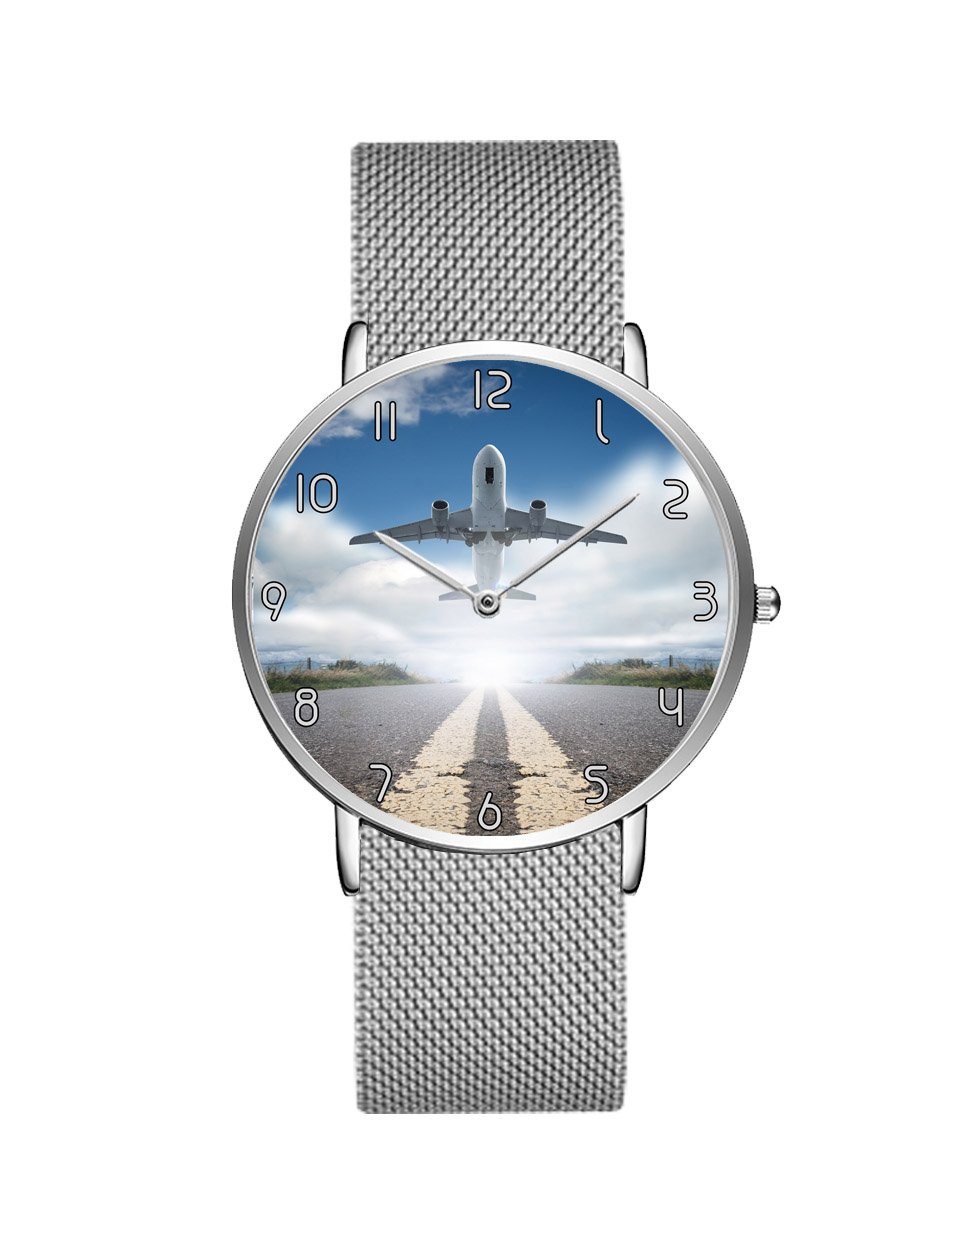 Taking Off Aircraft Printed Stainless Steel Strap Watches Aviation Shop Silver & Silver Stainless Steel Strap 